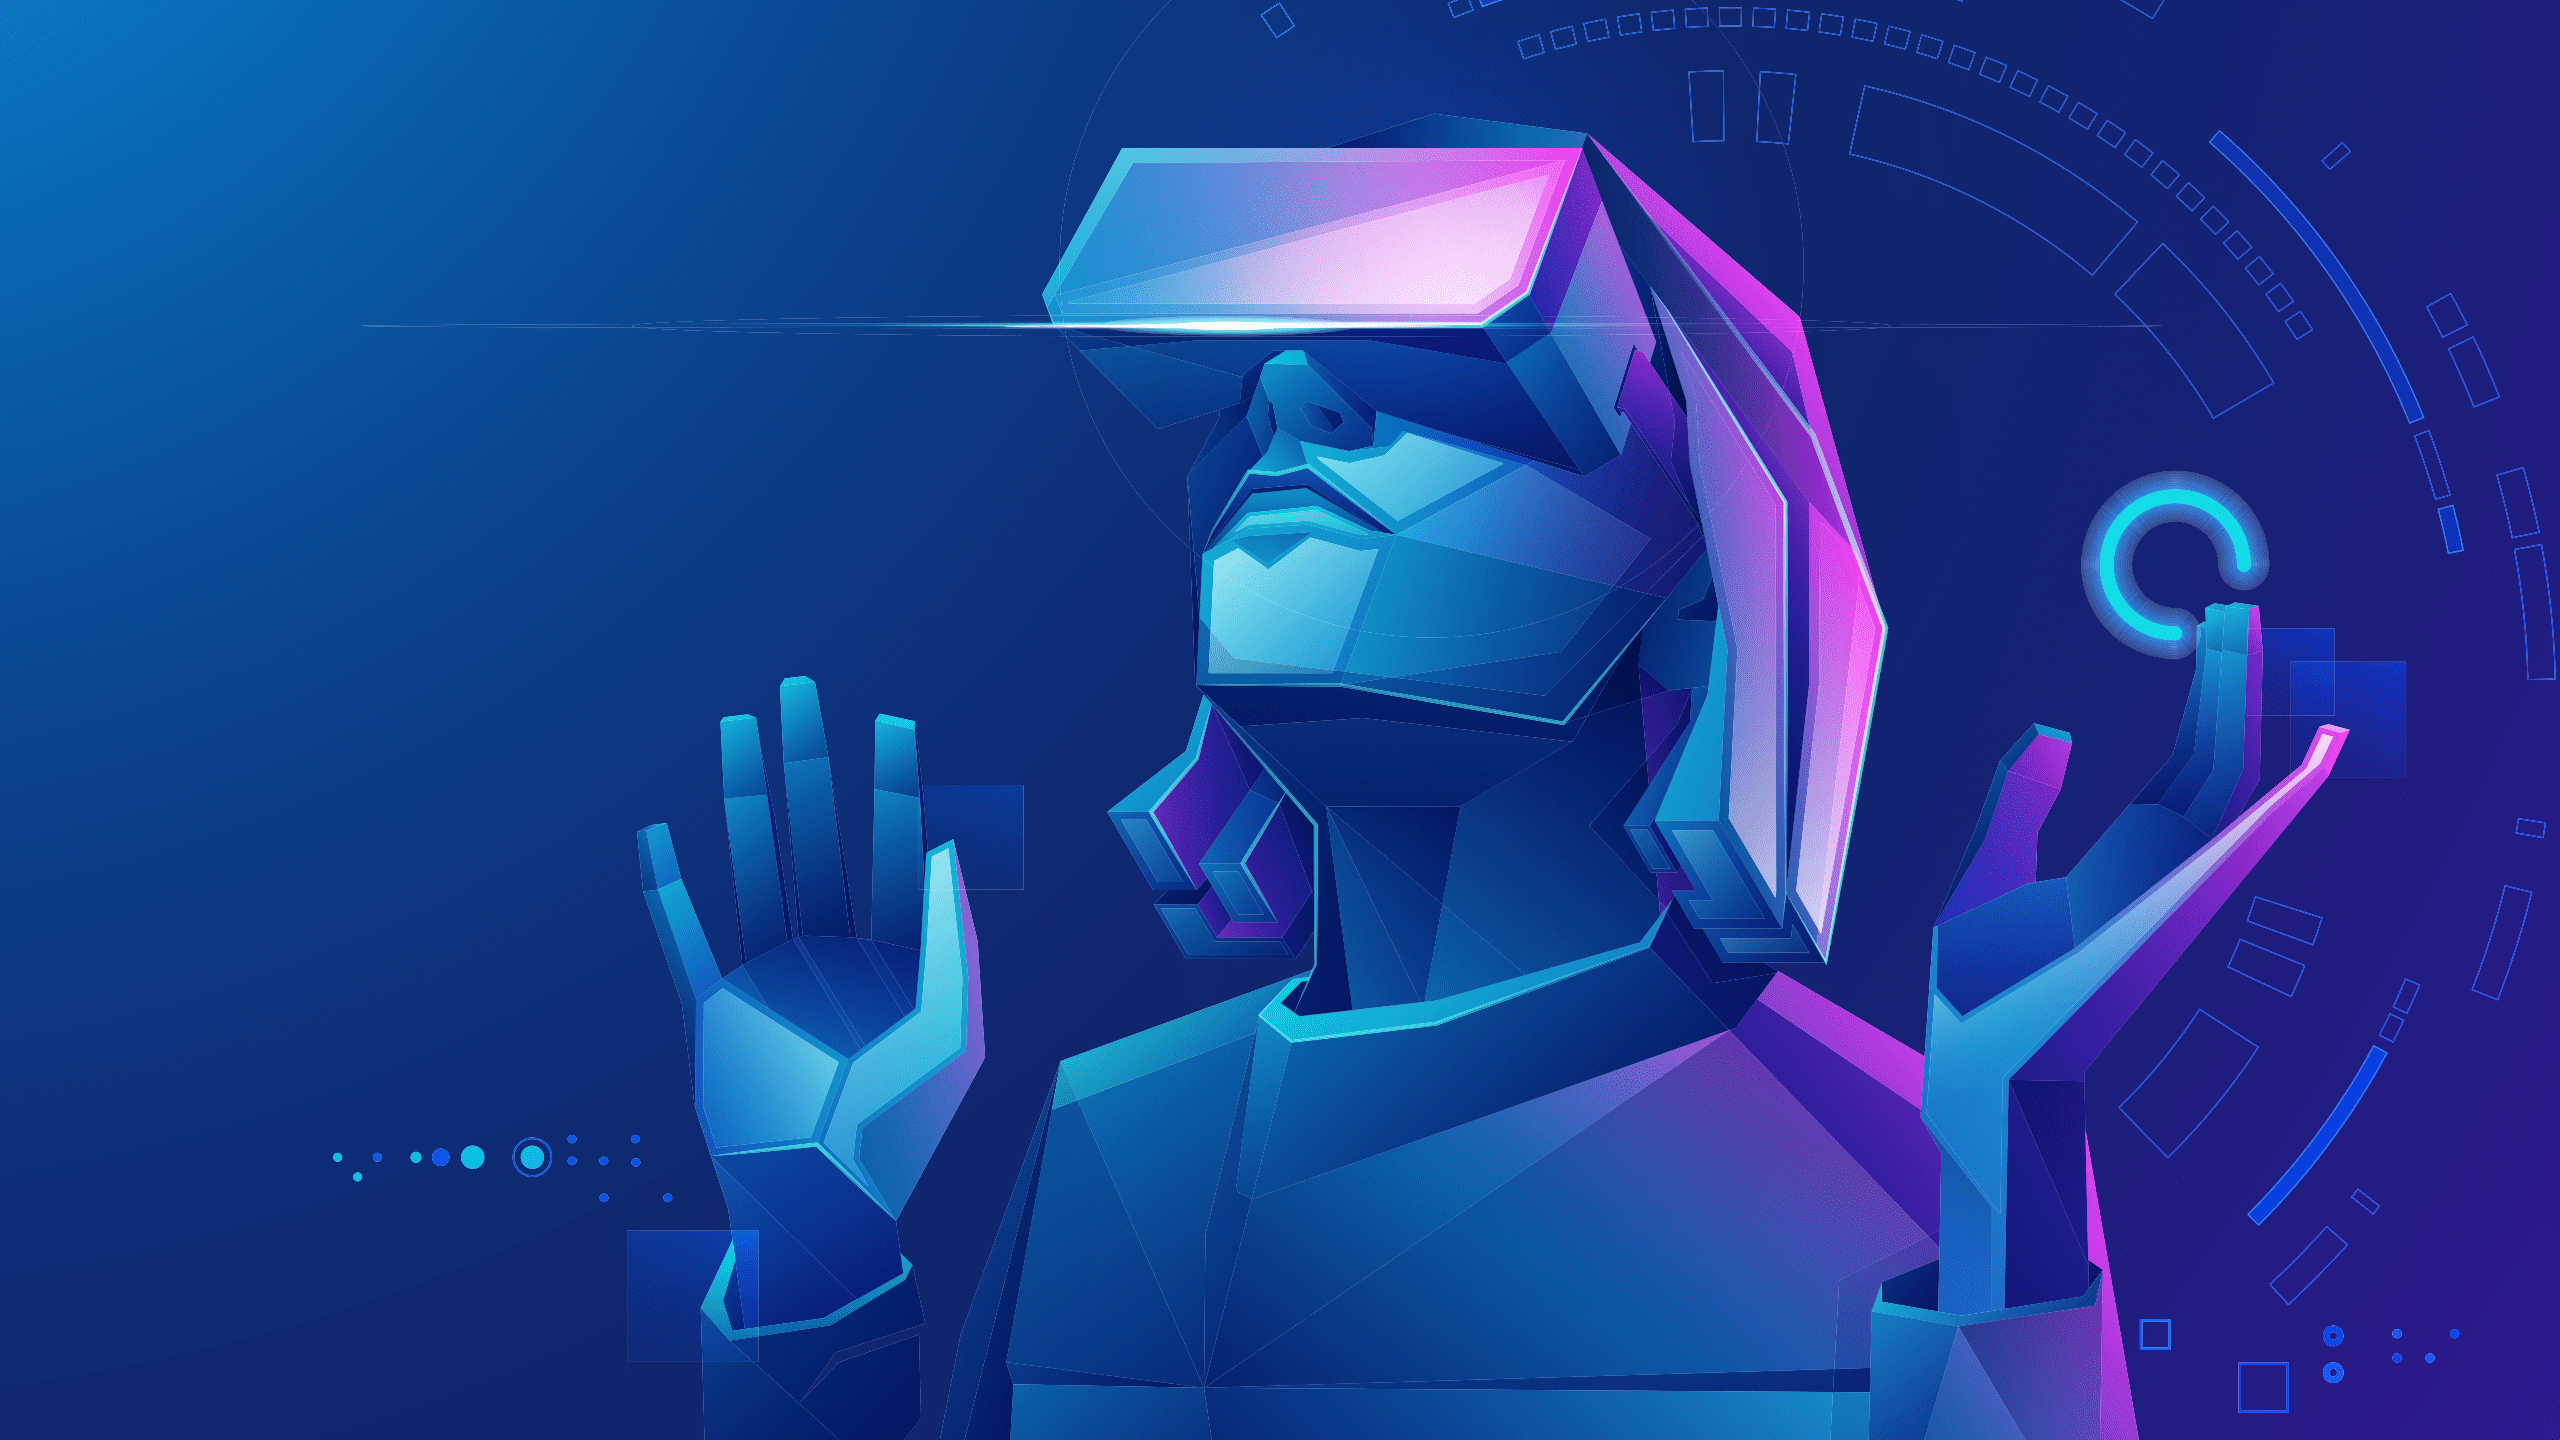 An illustration of a person in a VR headset looking pensive